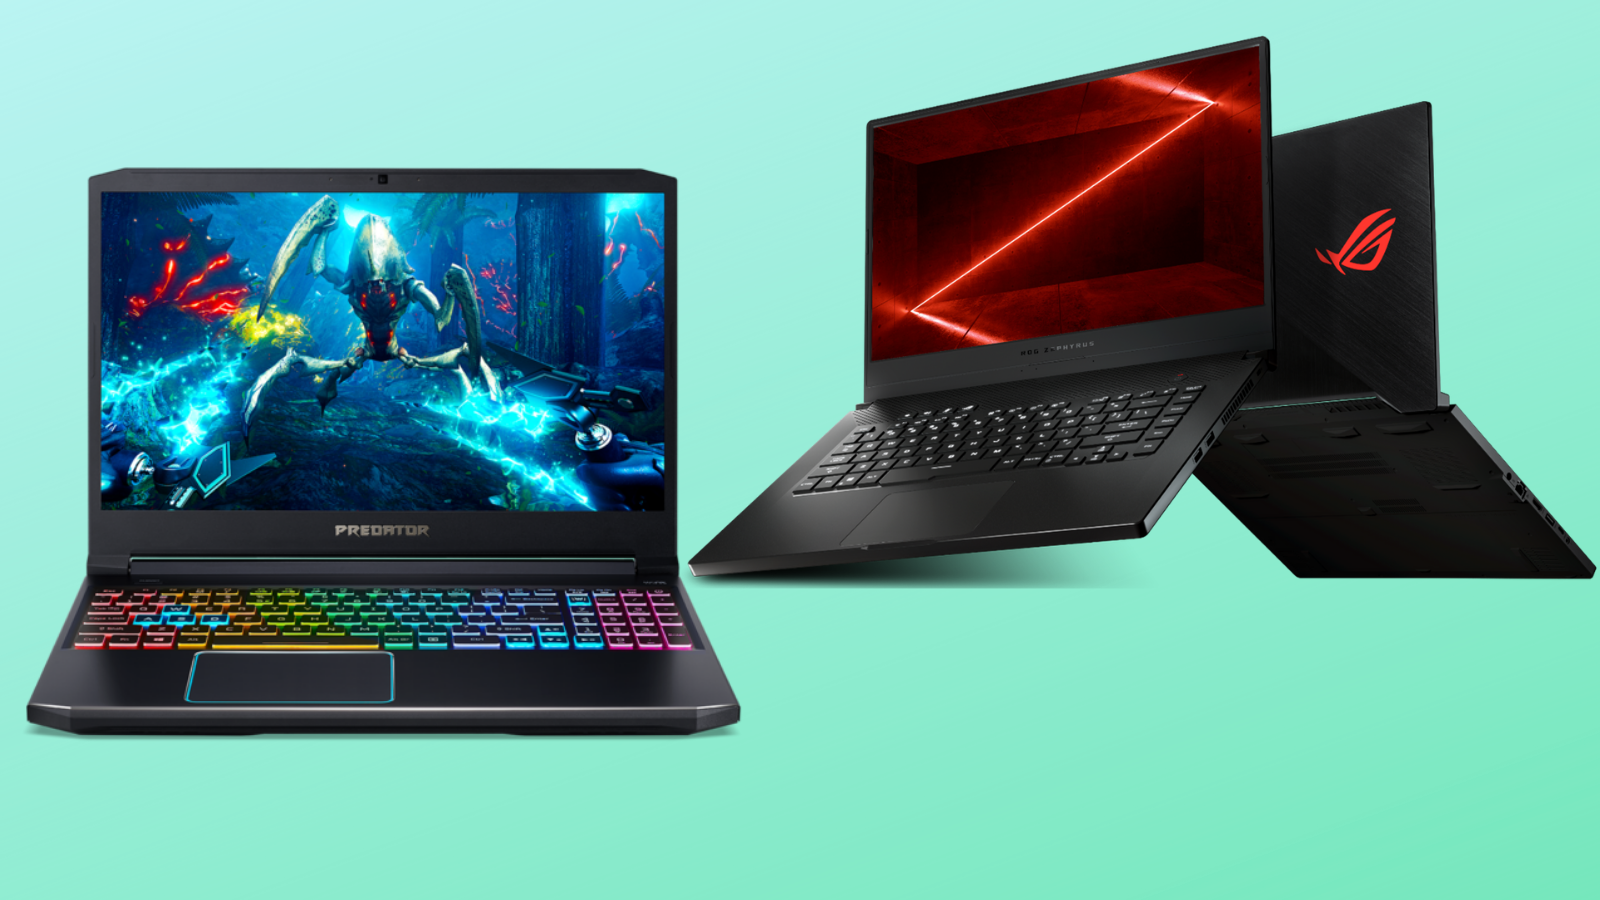 8 Best NVIDIA GTX 1660 Ti Gaming Laptops to Buy For High-End Gaming